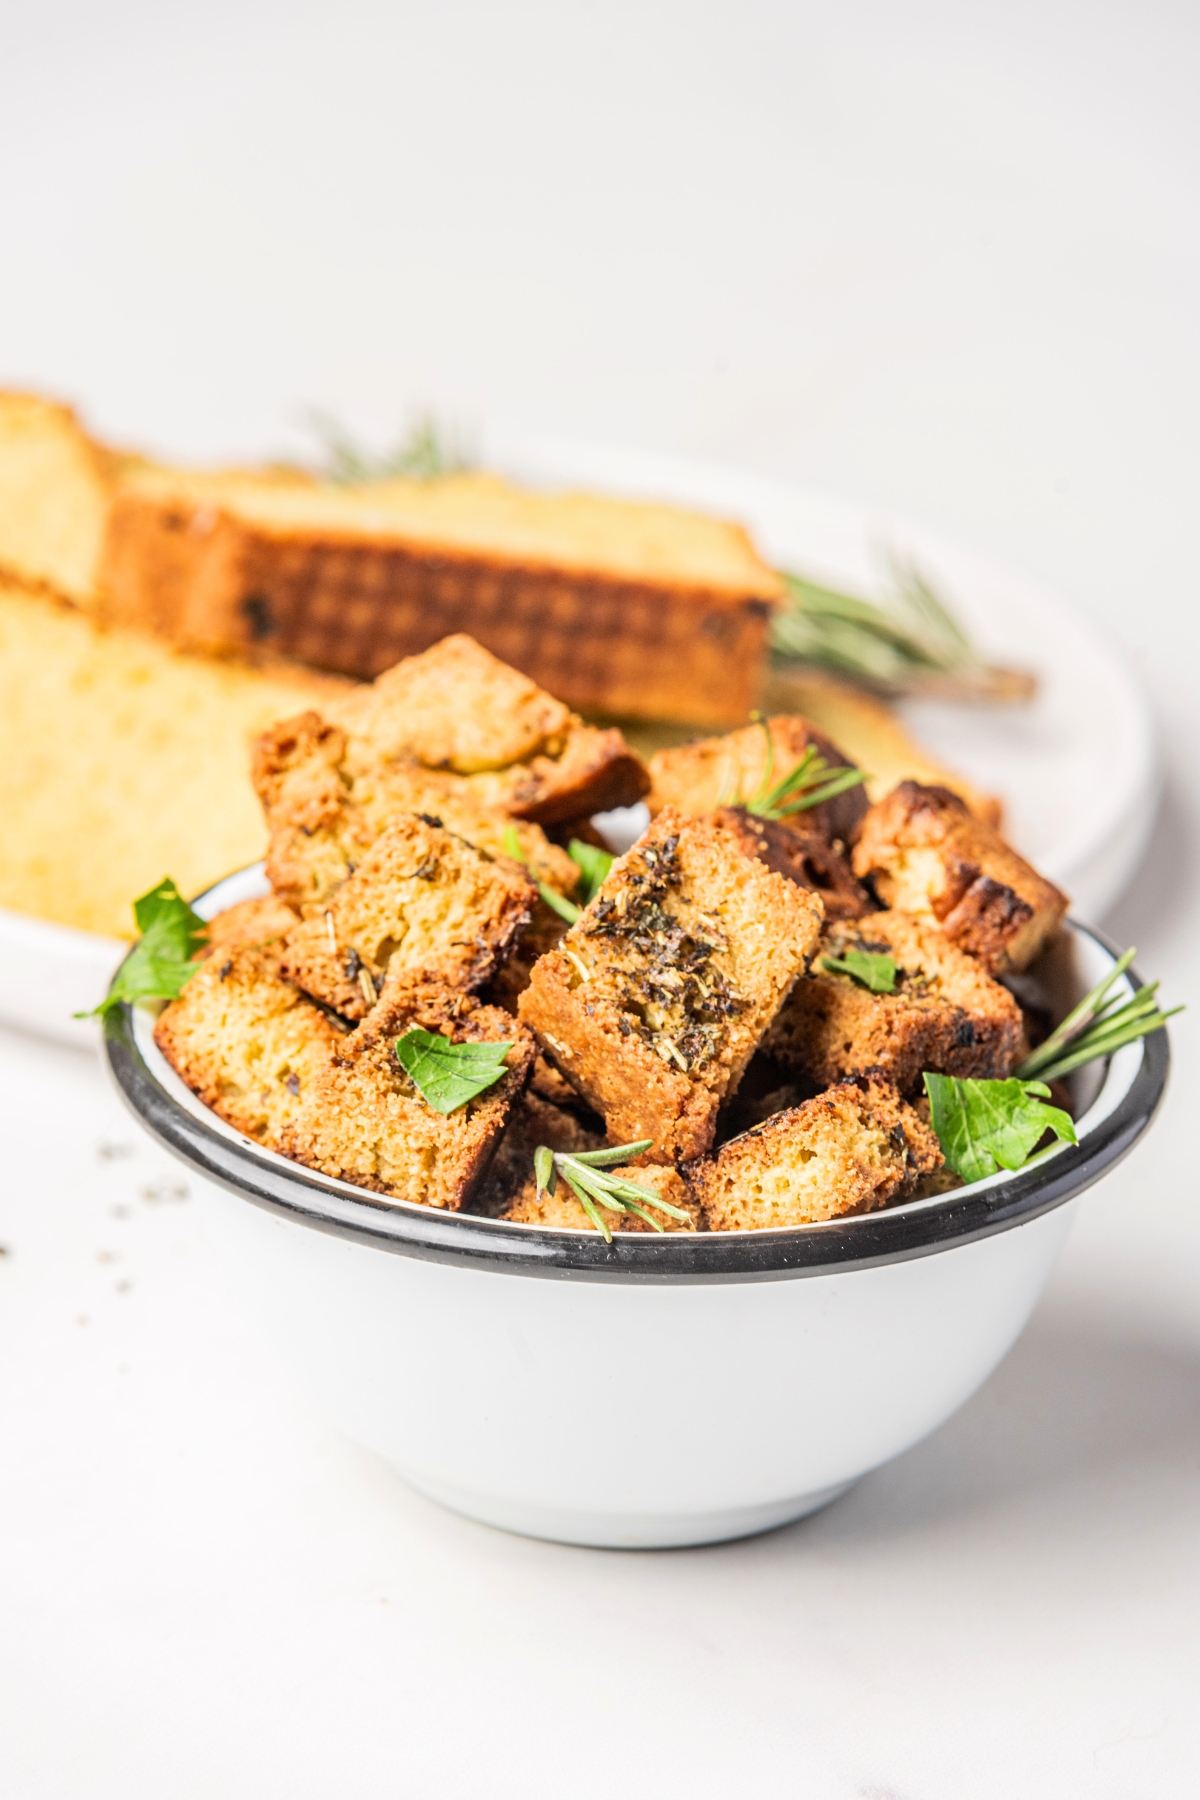 homemade croutons in a bowl